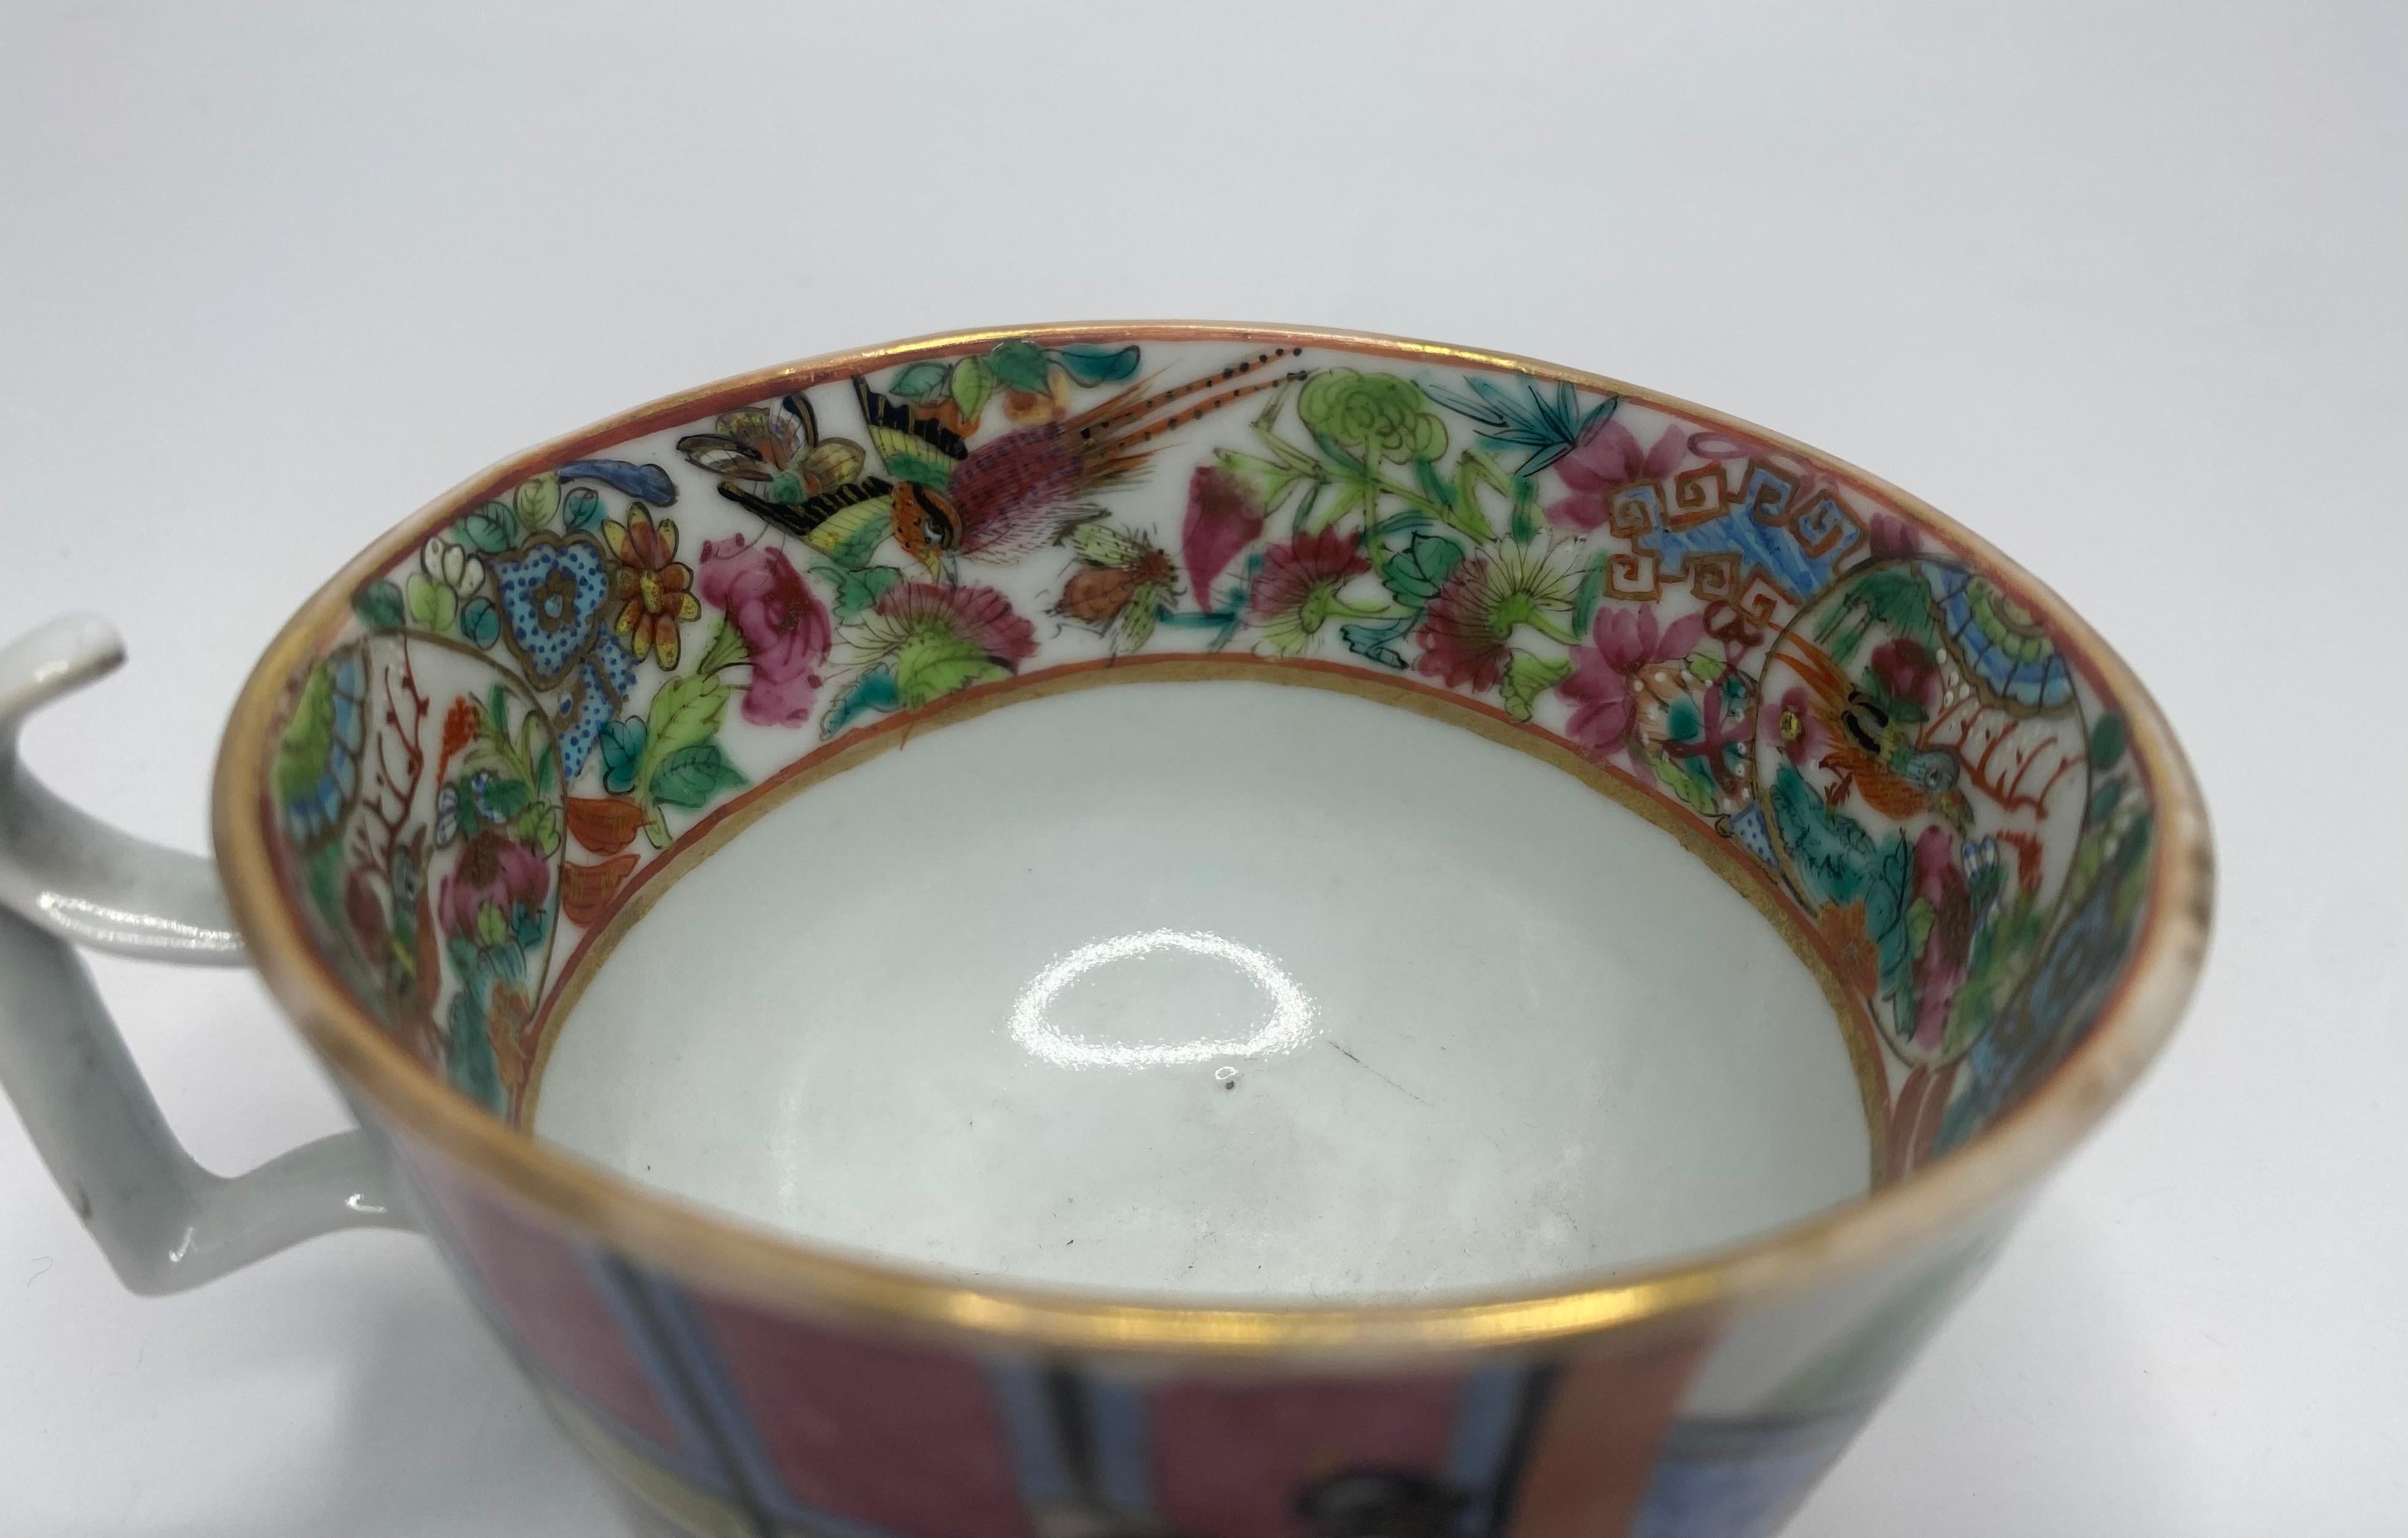 Chinese Canton porcelain cup & saucer, c. 1850. Qing dynasty. 4